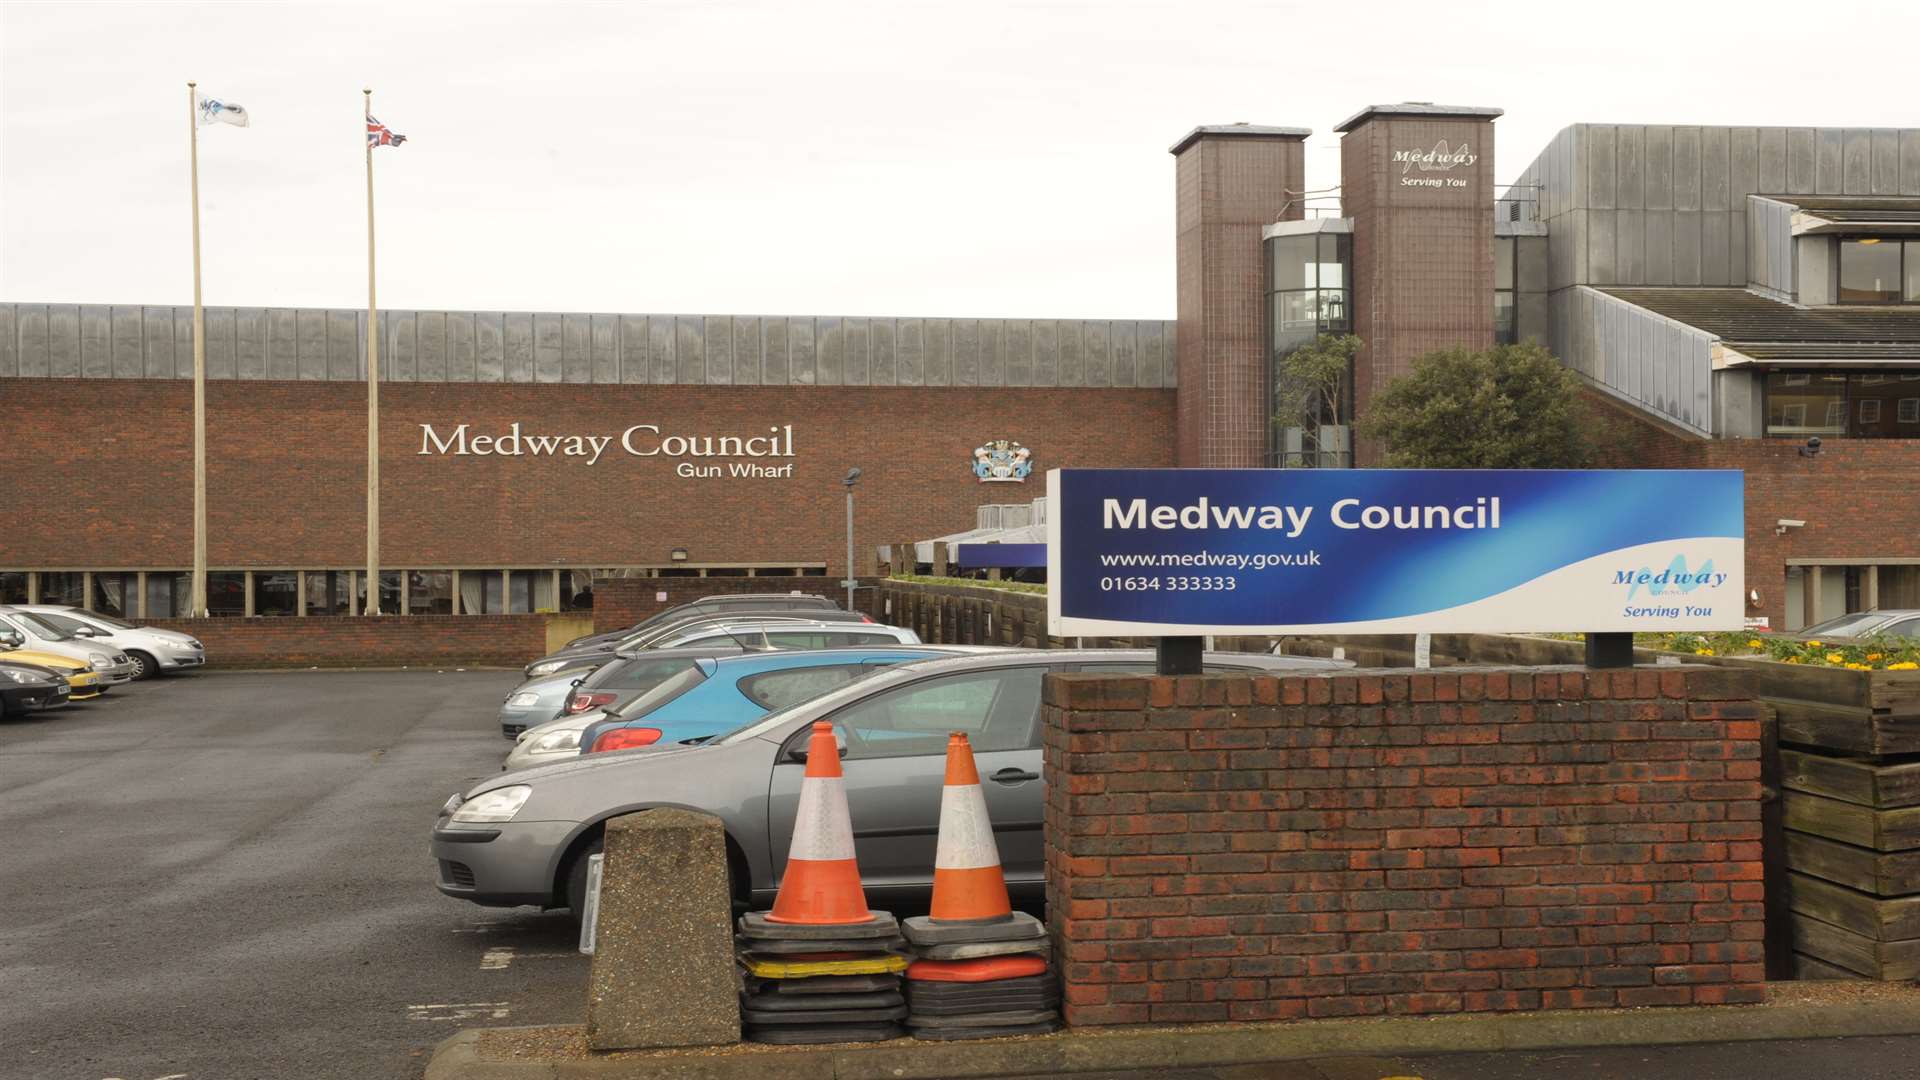 Medway Council building Gun Wharf in Dock Road, Chatham.